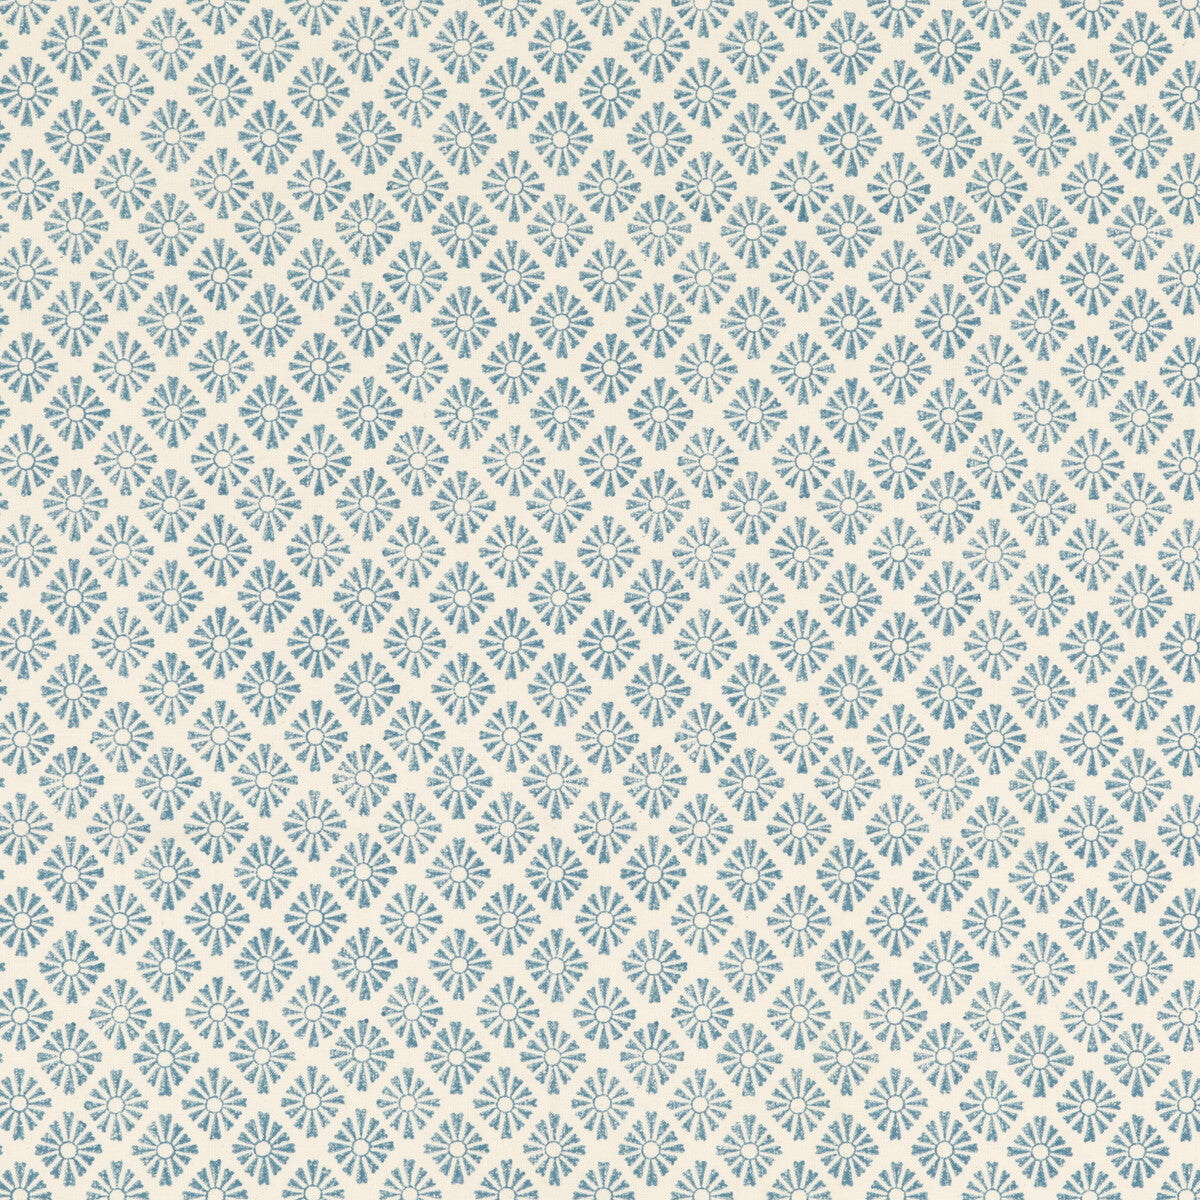 Sunburst fabric in denim color - pattern PP50476.3.0 - by Baker Lifestyle in the Fiesta collection